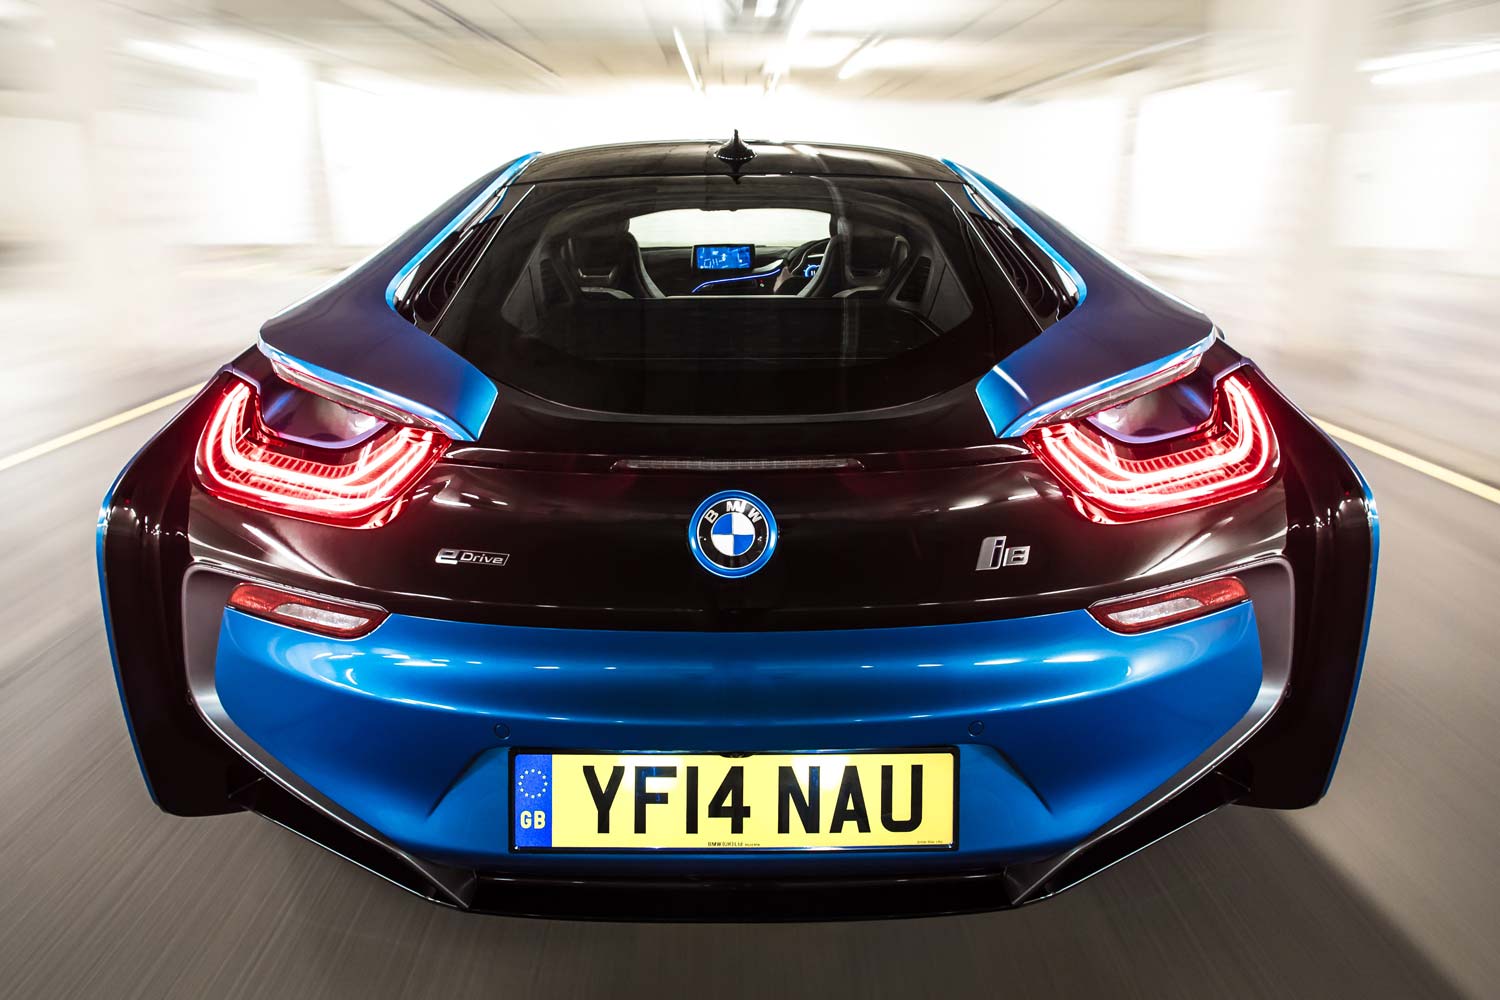 Drive Review of the BMW i8 by Neil Lyndon